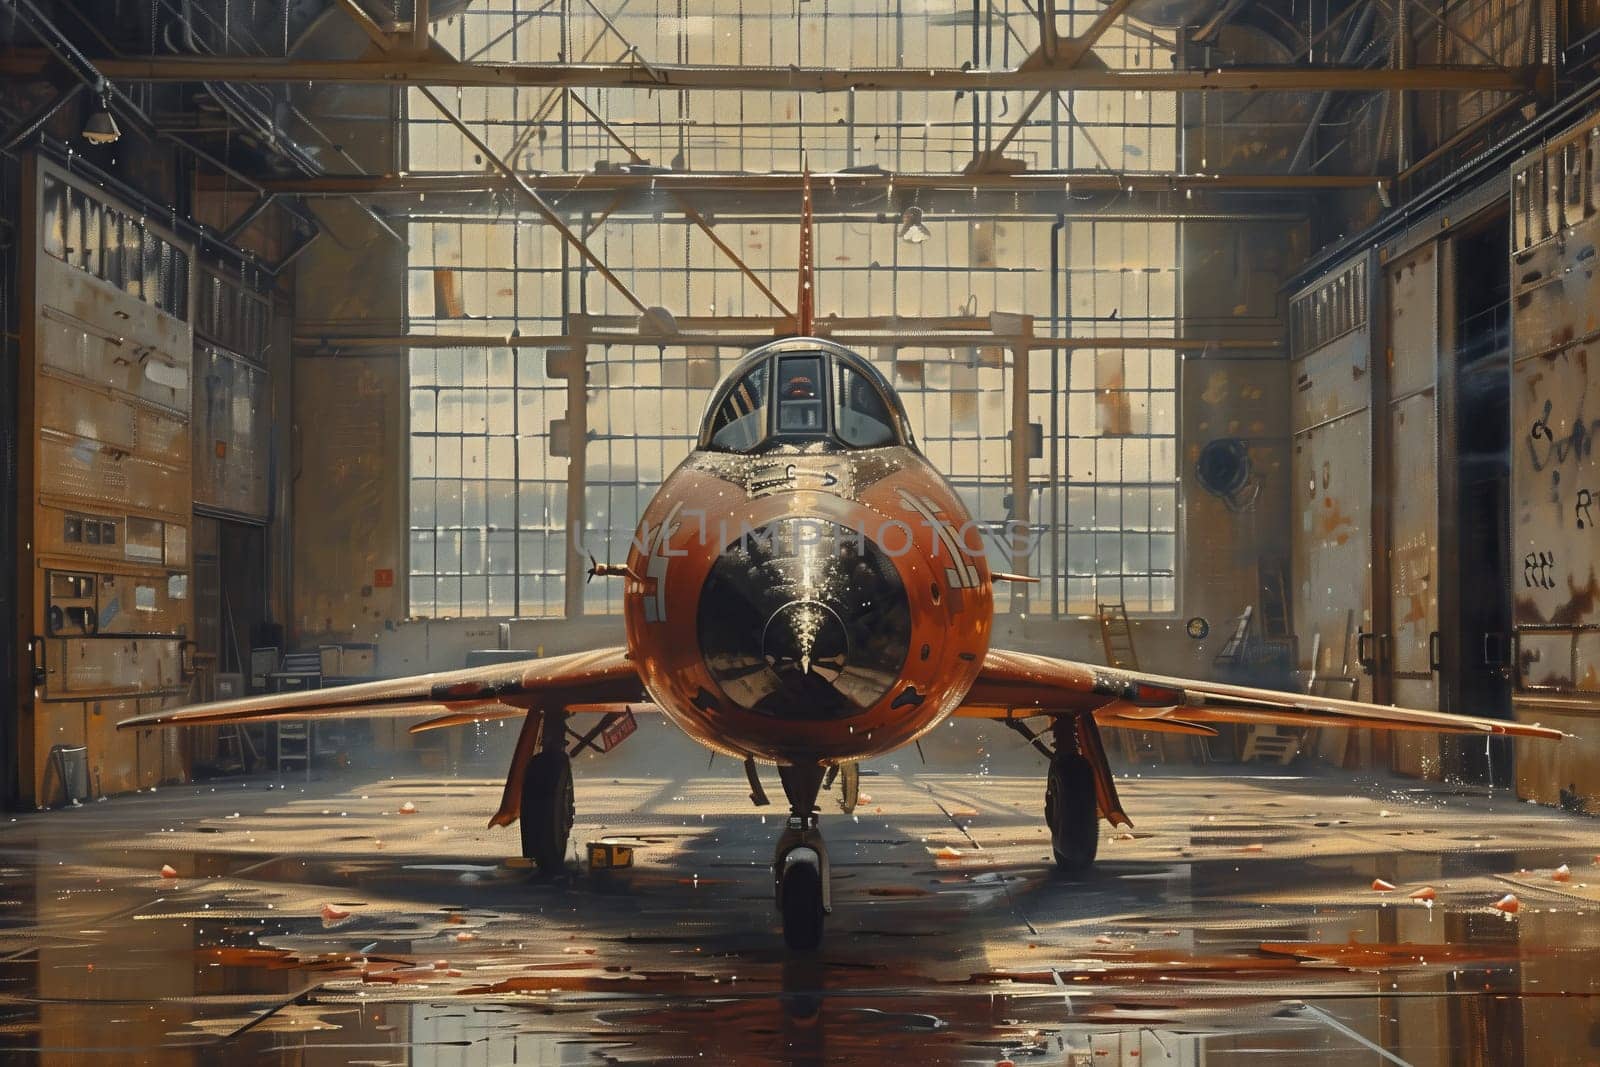 An aircraft, specifically a fighter jet, is stored in a hangar, a building made of wood and used to house airplanes